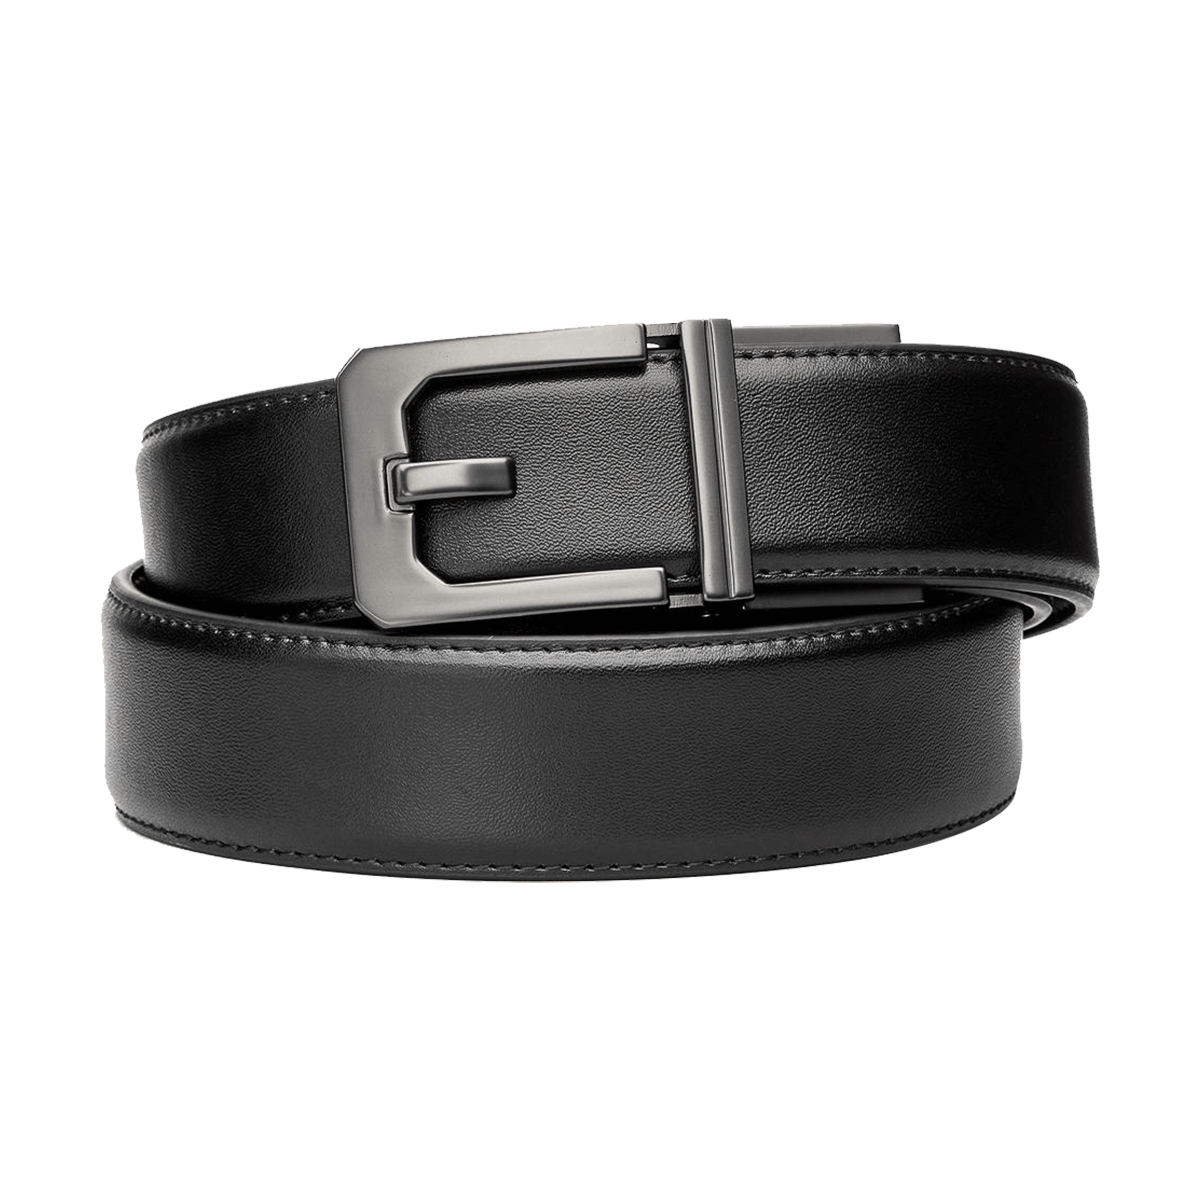 KORE X3 LEATHER TACTICAL GUN BELT – Forged Philippines